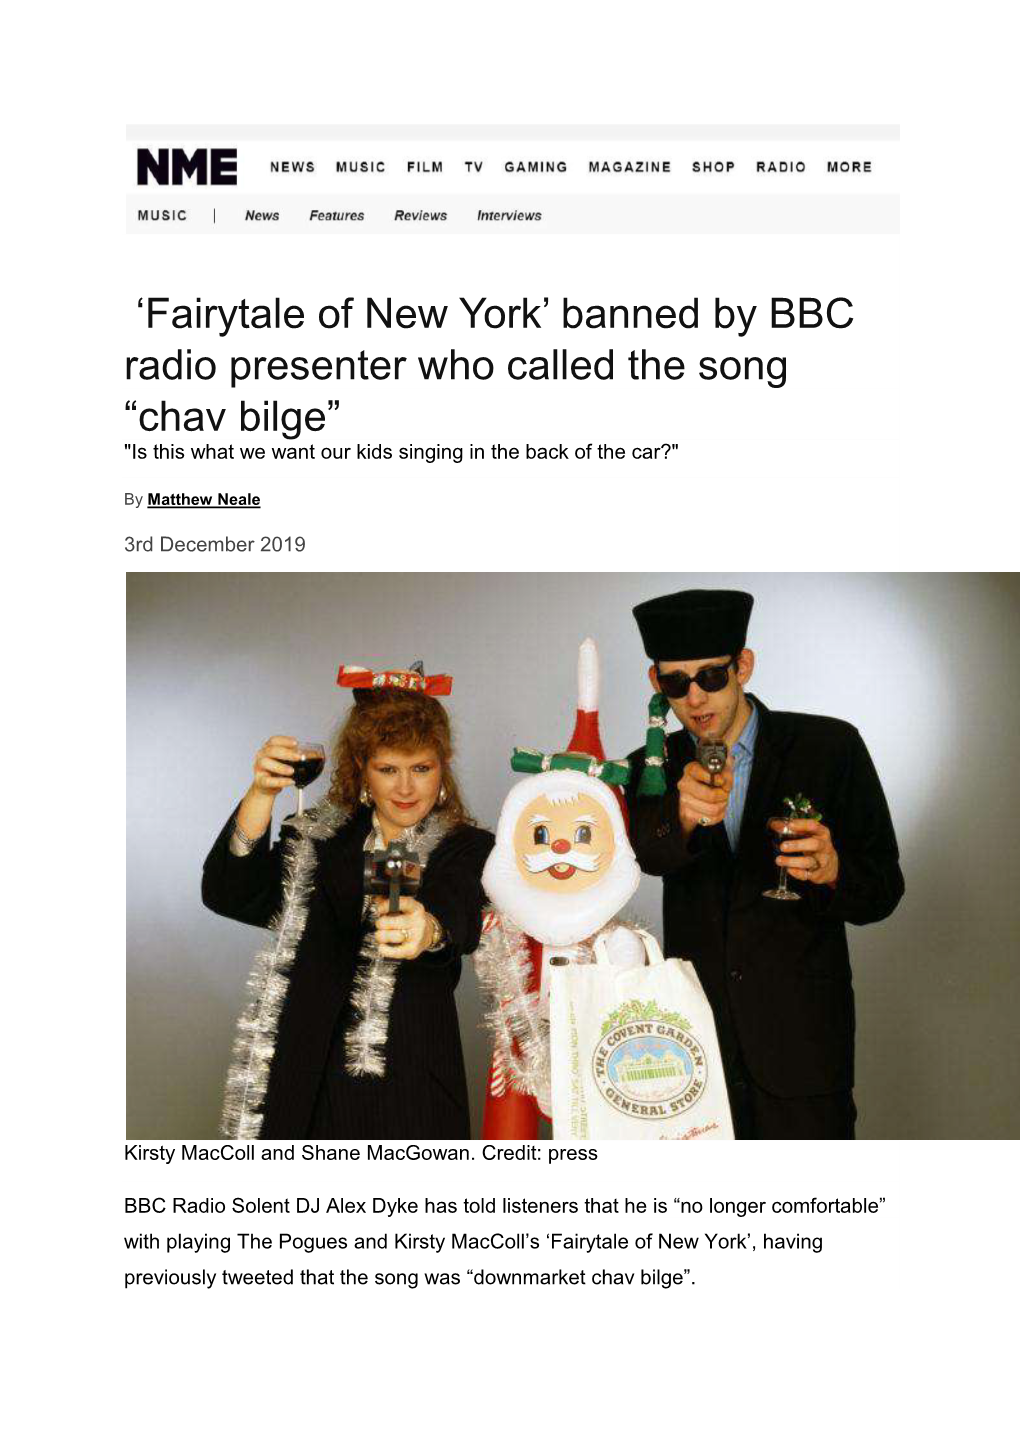 'Fairytale of New York' Banned by BBC Radio Presenter Who Called the Song